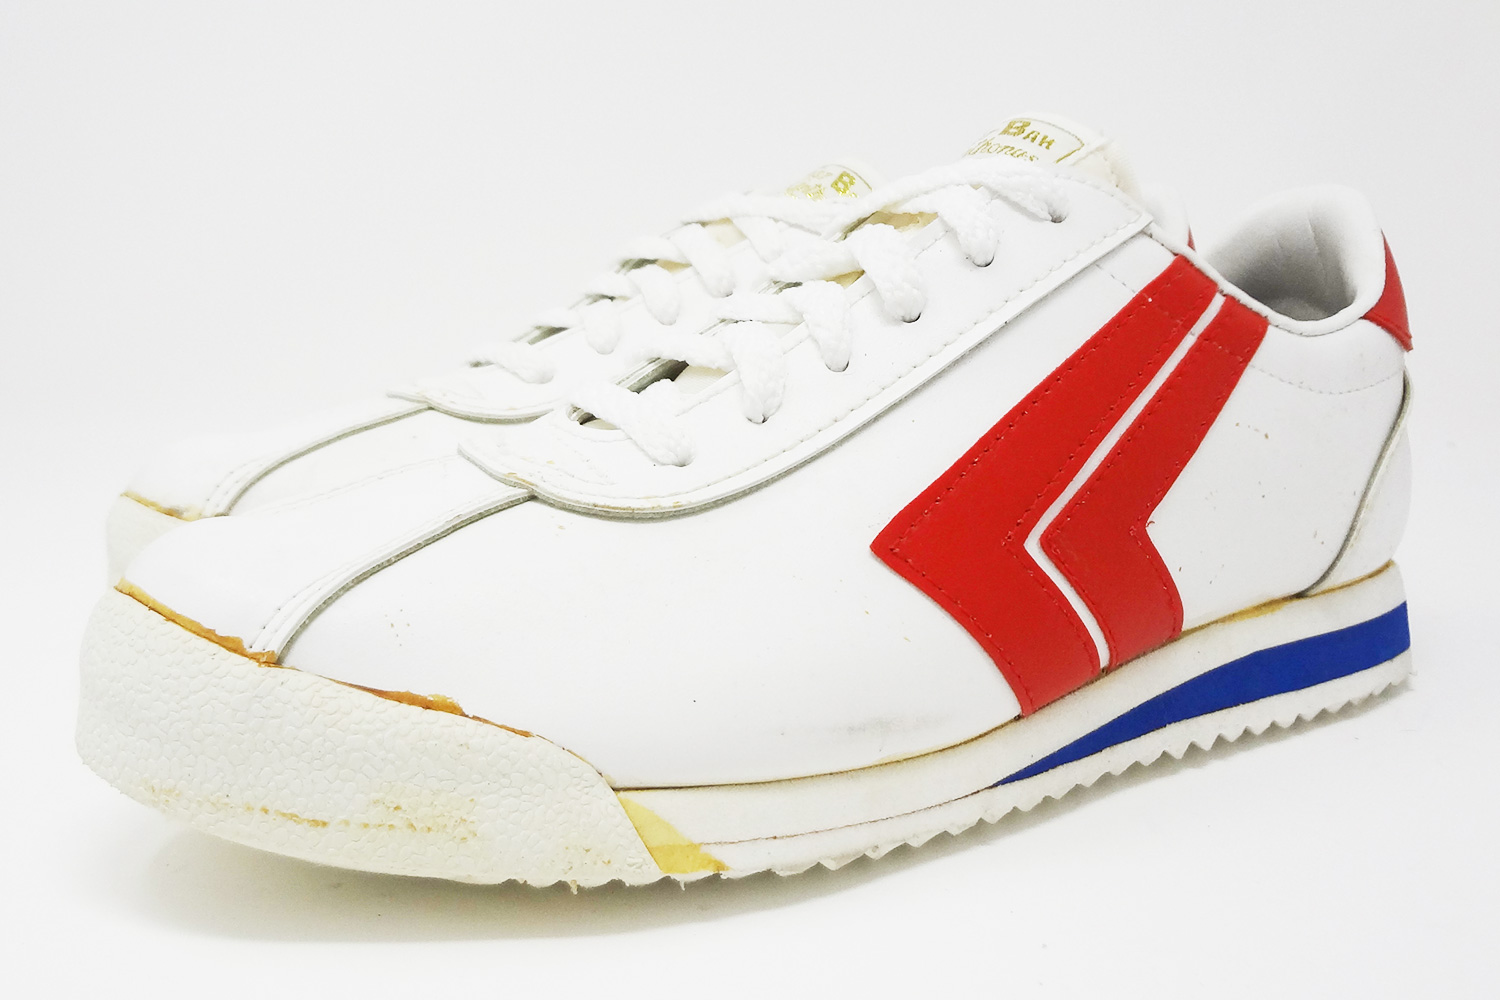 Old school 1980s Fast Bak vintage Onitsuka Tiger Corsair style sneakers @ The Deffest